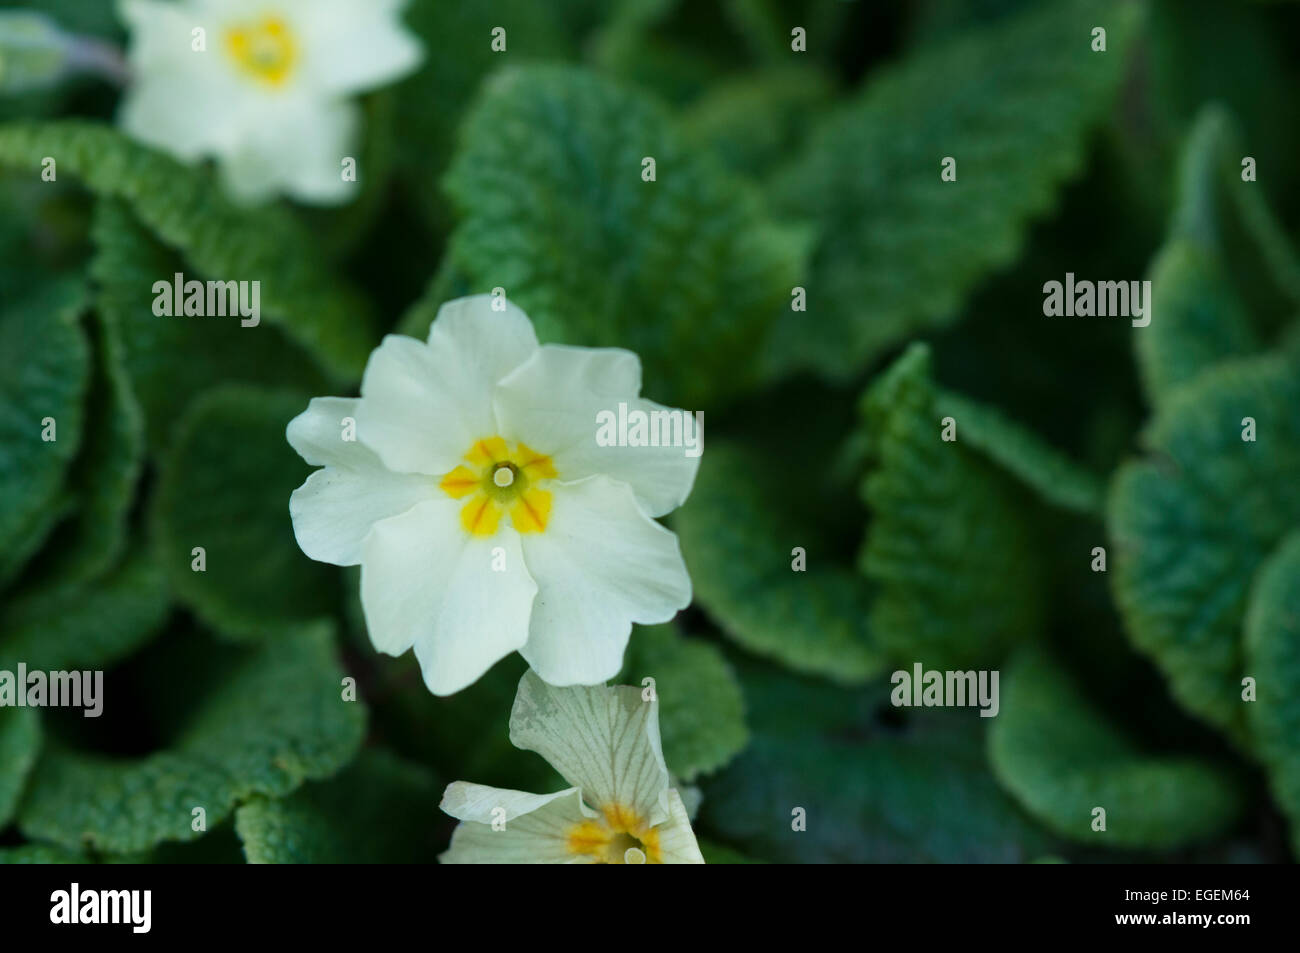 Flower of primrose against a background of foliage Stock Photo